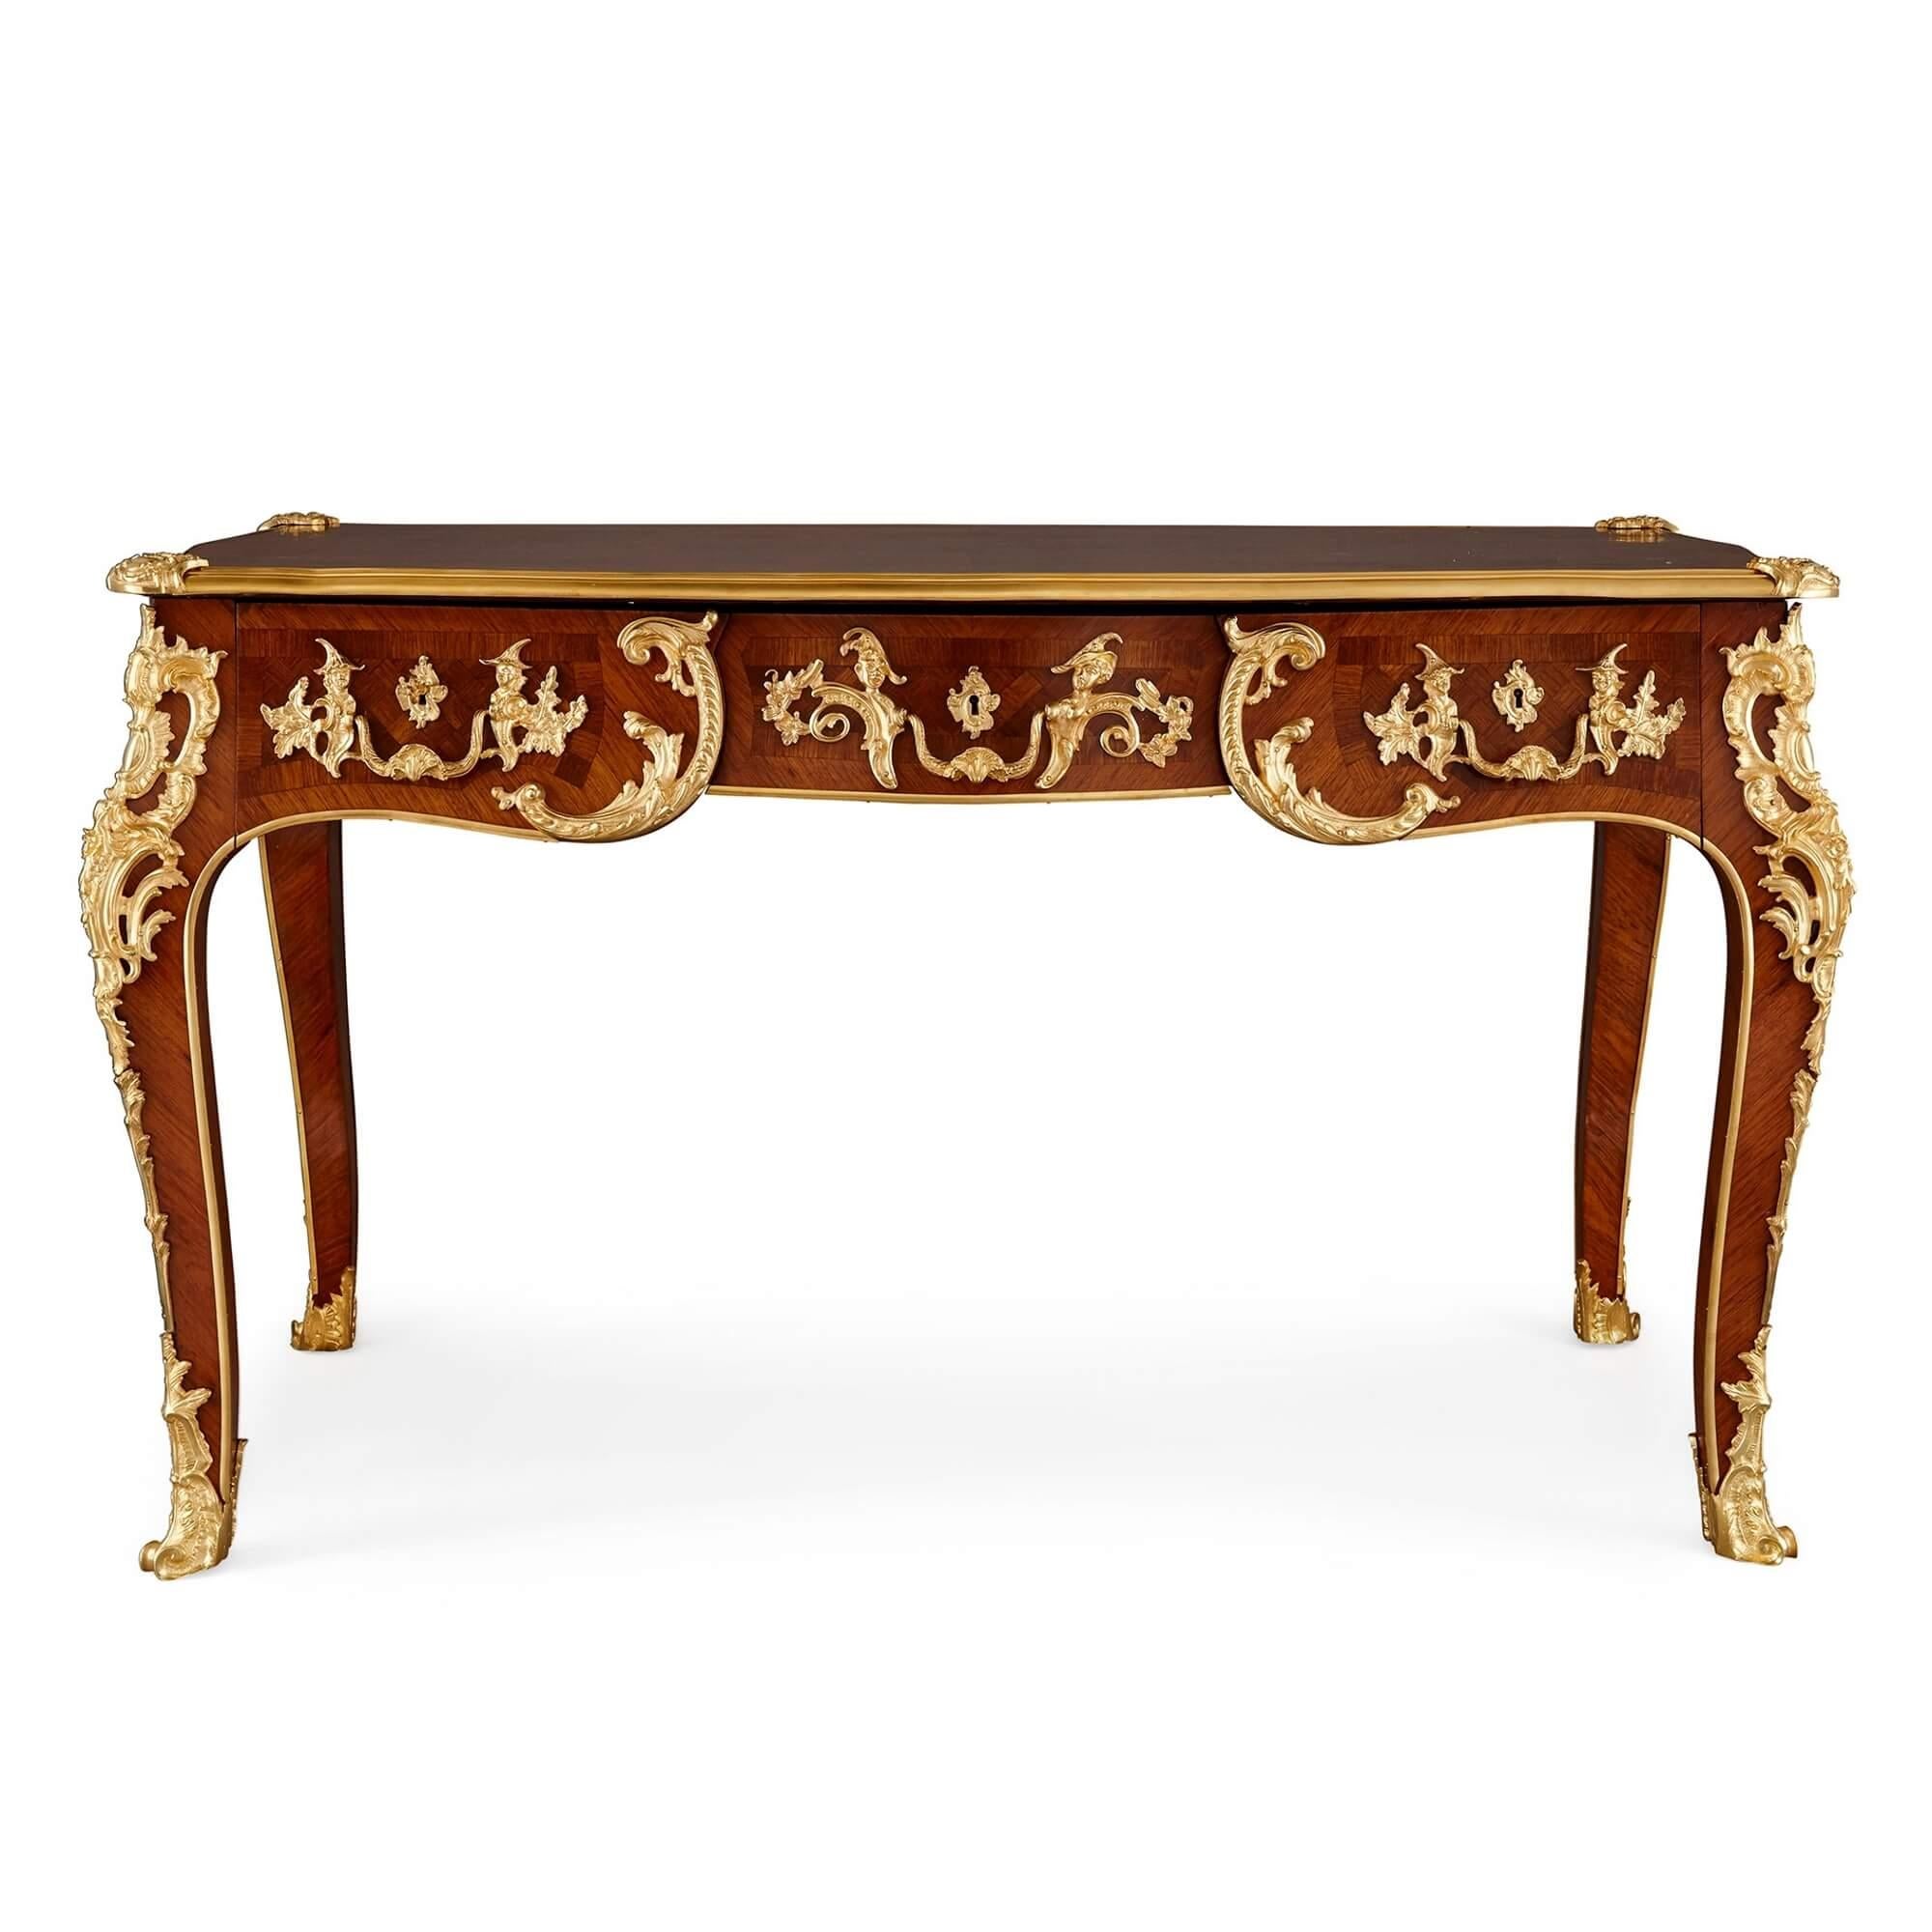 French gilt bronze and marquetry writing desk after Cressent.
French, late 19th century
Measures: height 79cm, width 134cm, depth 76cm

This very fine desk was retailed by the celebrated English retailers Edwards & Roberts and was designed and